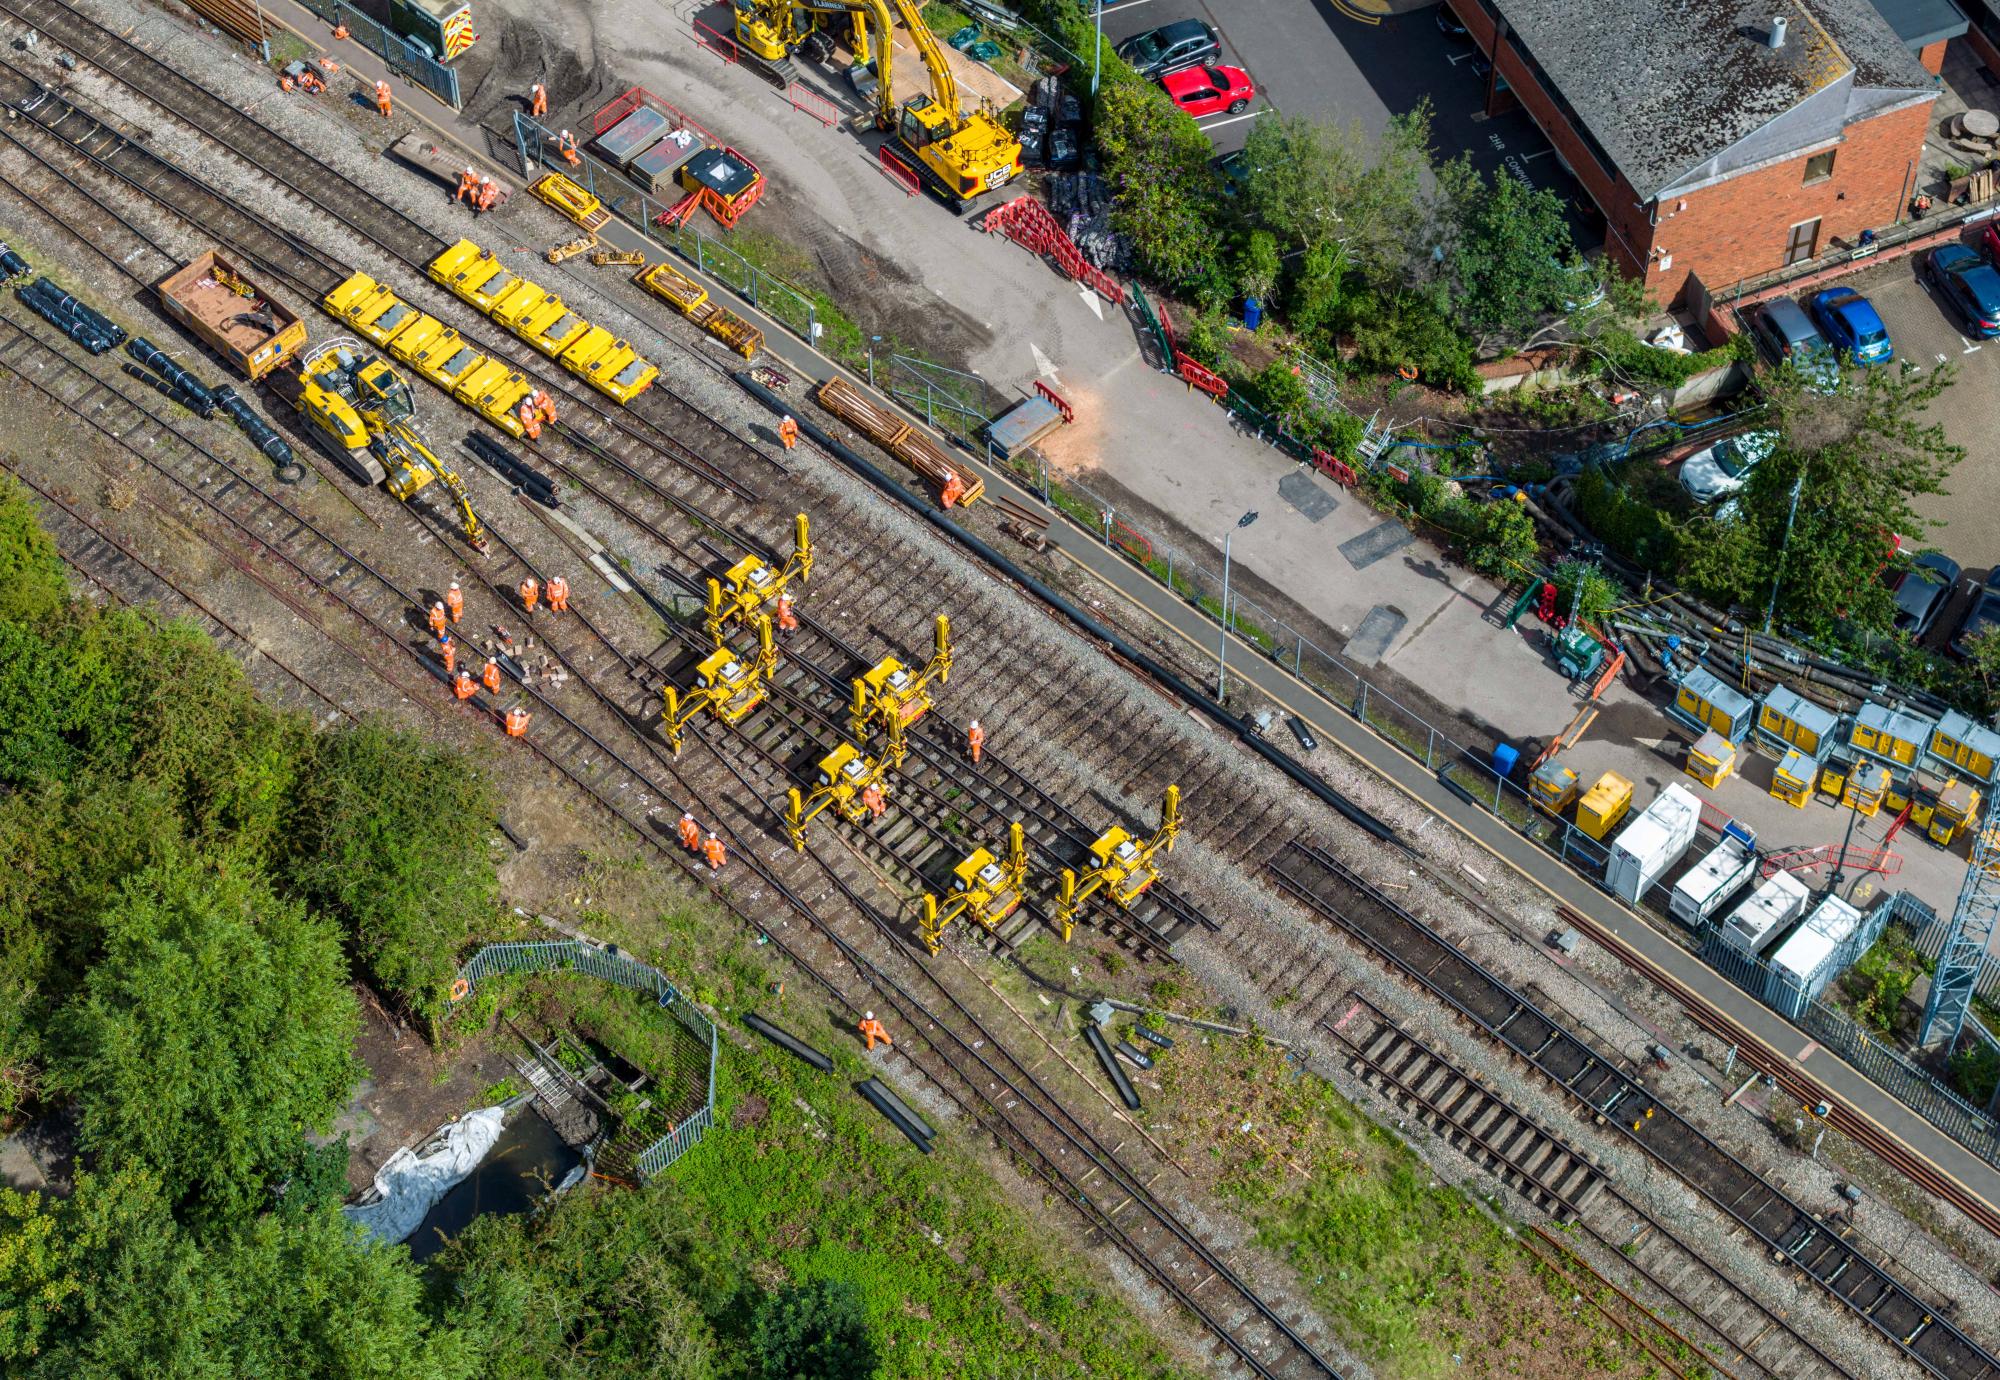 Network Rail CP7 funding plans approved by ORR